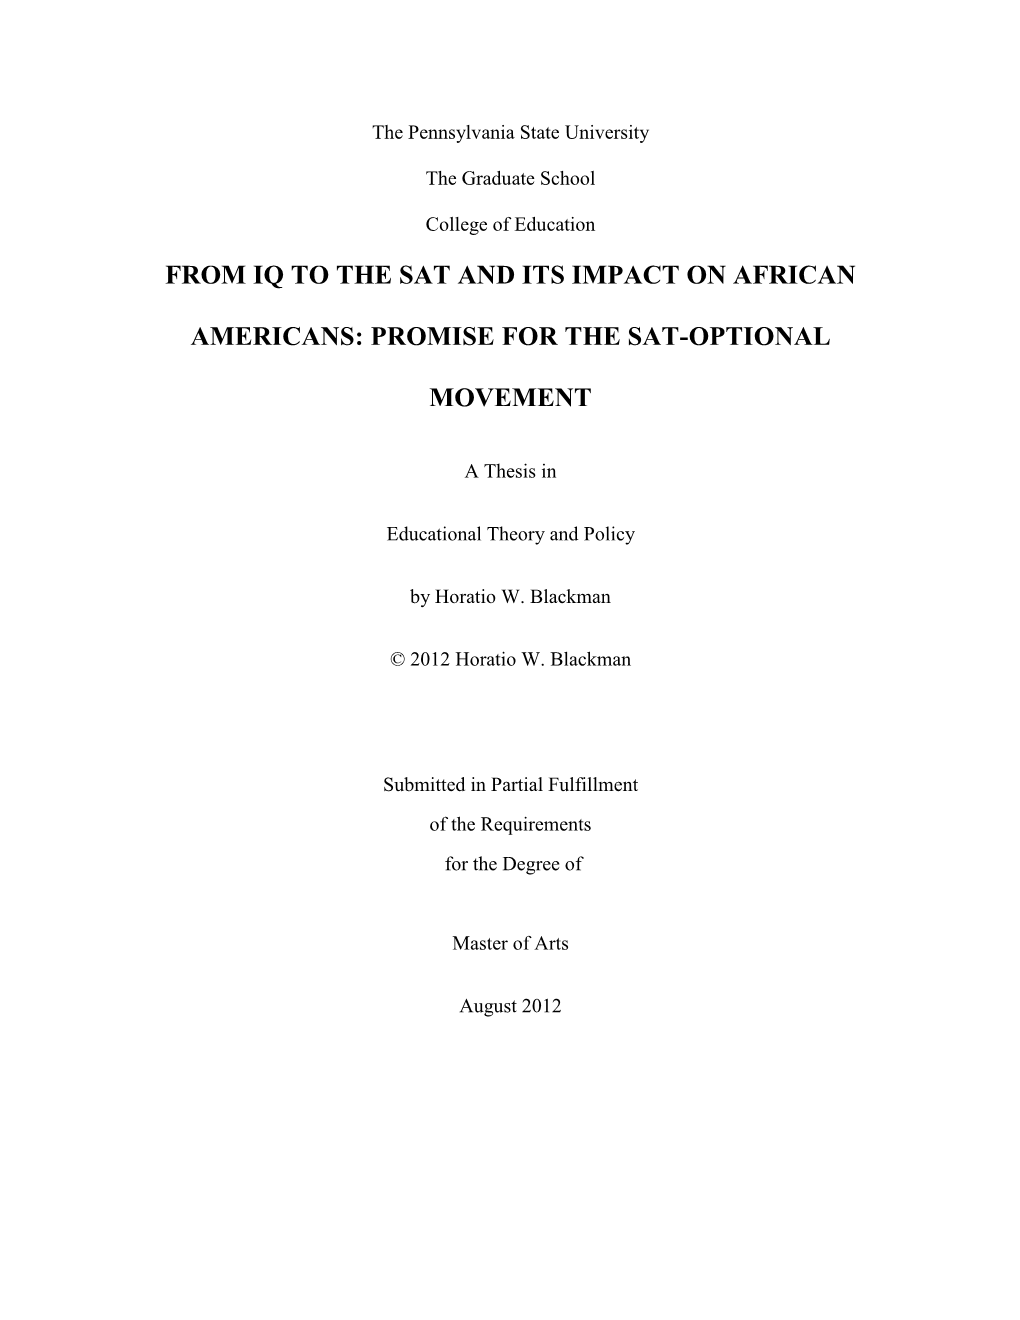 From Iq to the Sat and Its Impact on African Americans